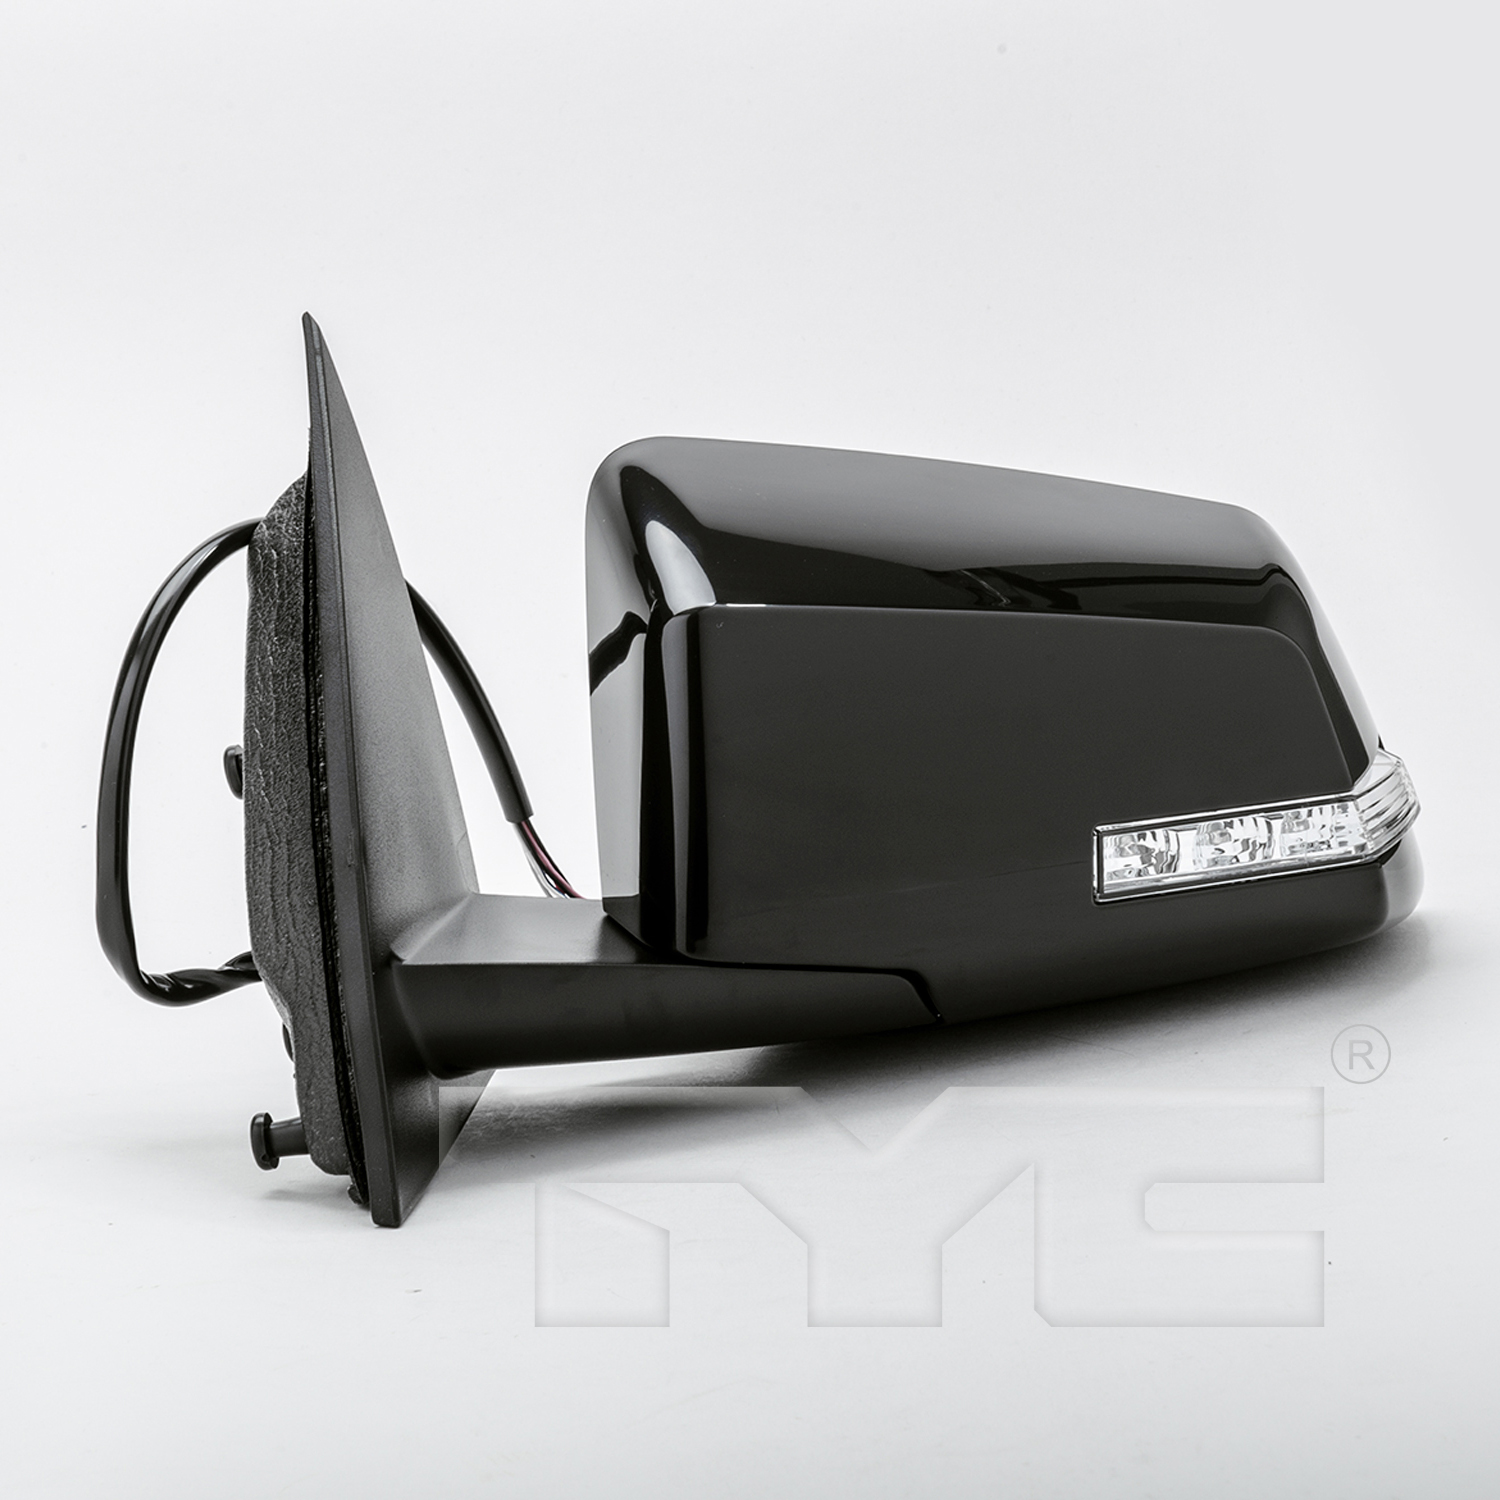 Aftermarket MIRRORS for CHEVROLET - TRAVERSE, TRAVERSE,09-14,LT Mirror outside rear view